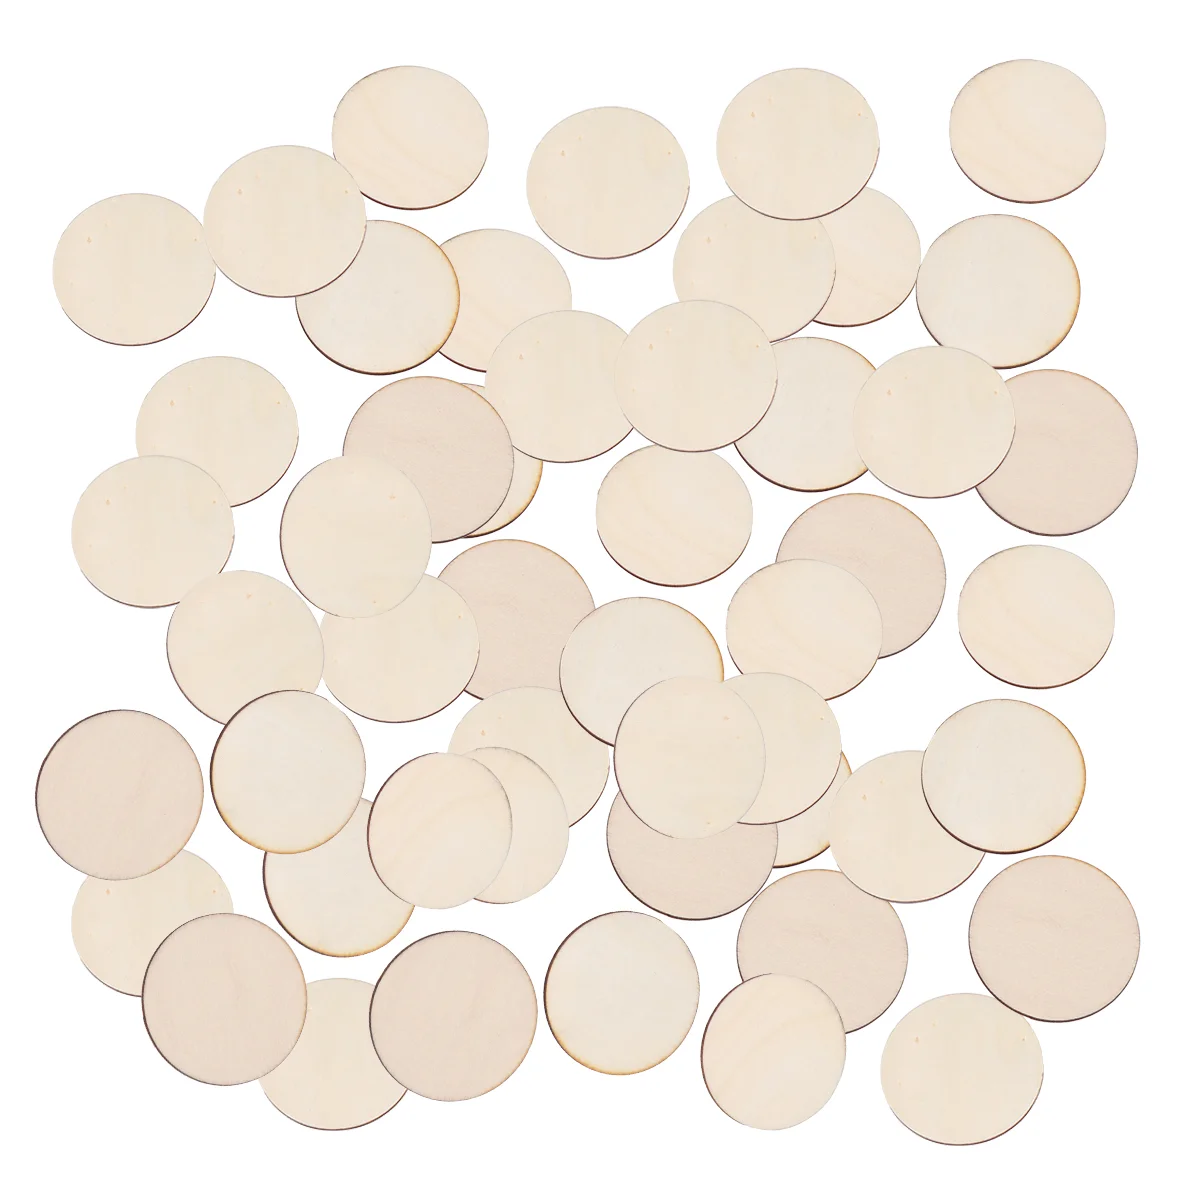 

50 Pcs Small Wood Rounds Discs Birthday Plaque Unfinished Wooden Crafts Kids DIY Piece Circle Ornaments Slices Circles